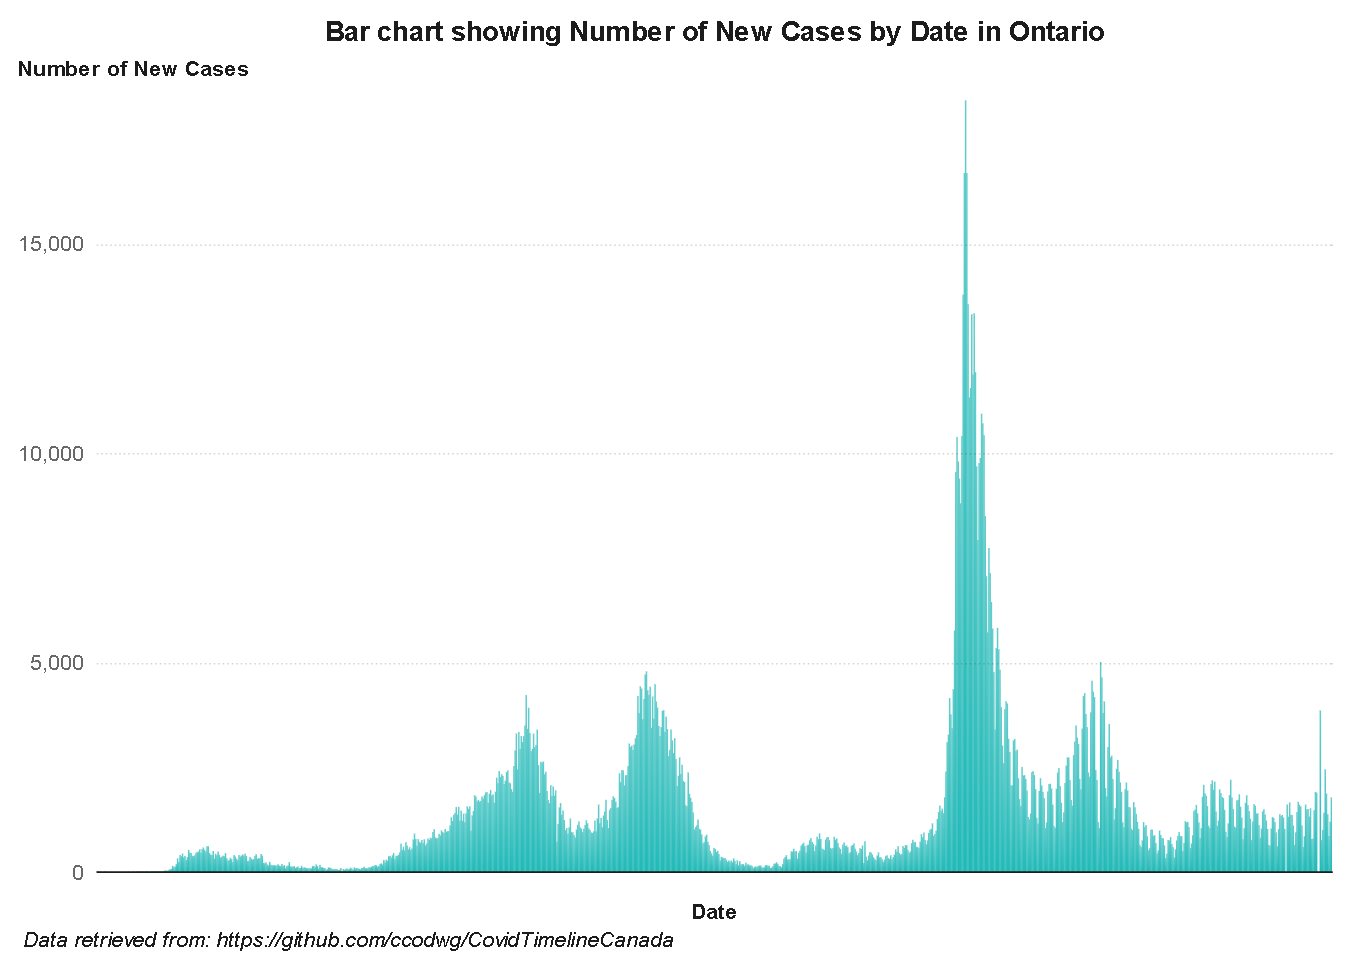 A bar graph with vertical bars depicting the number of new COVID-19 cases in Ontario.